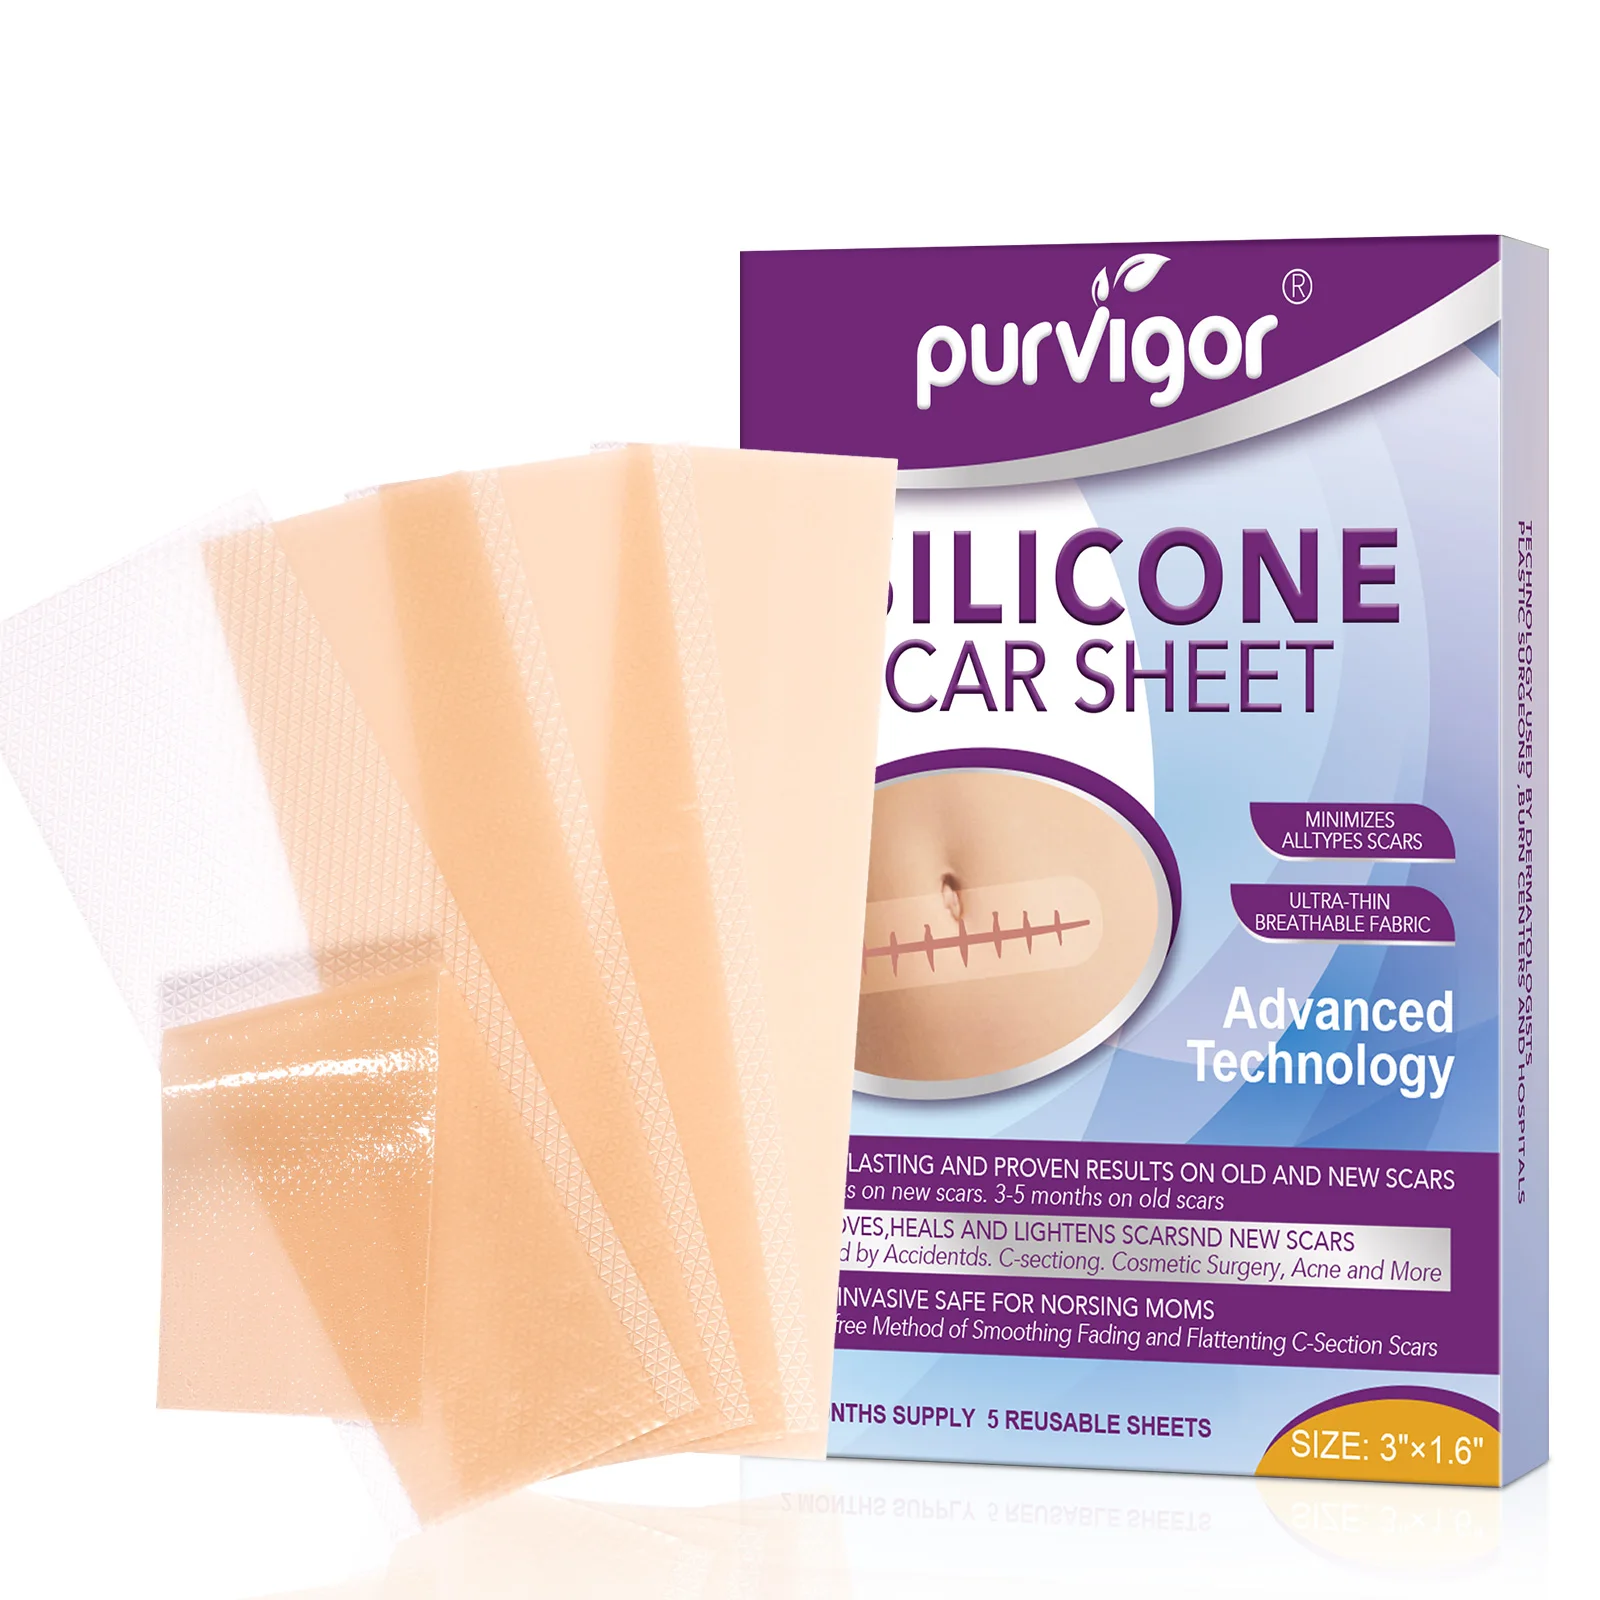 

PURVIGOR waterproof breathable medical repair skin professional scars removal silicone gel sheets for keloid scars